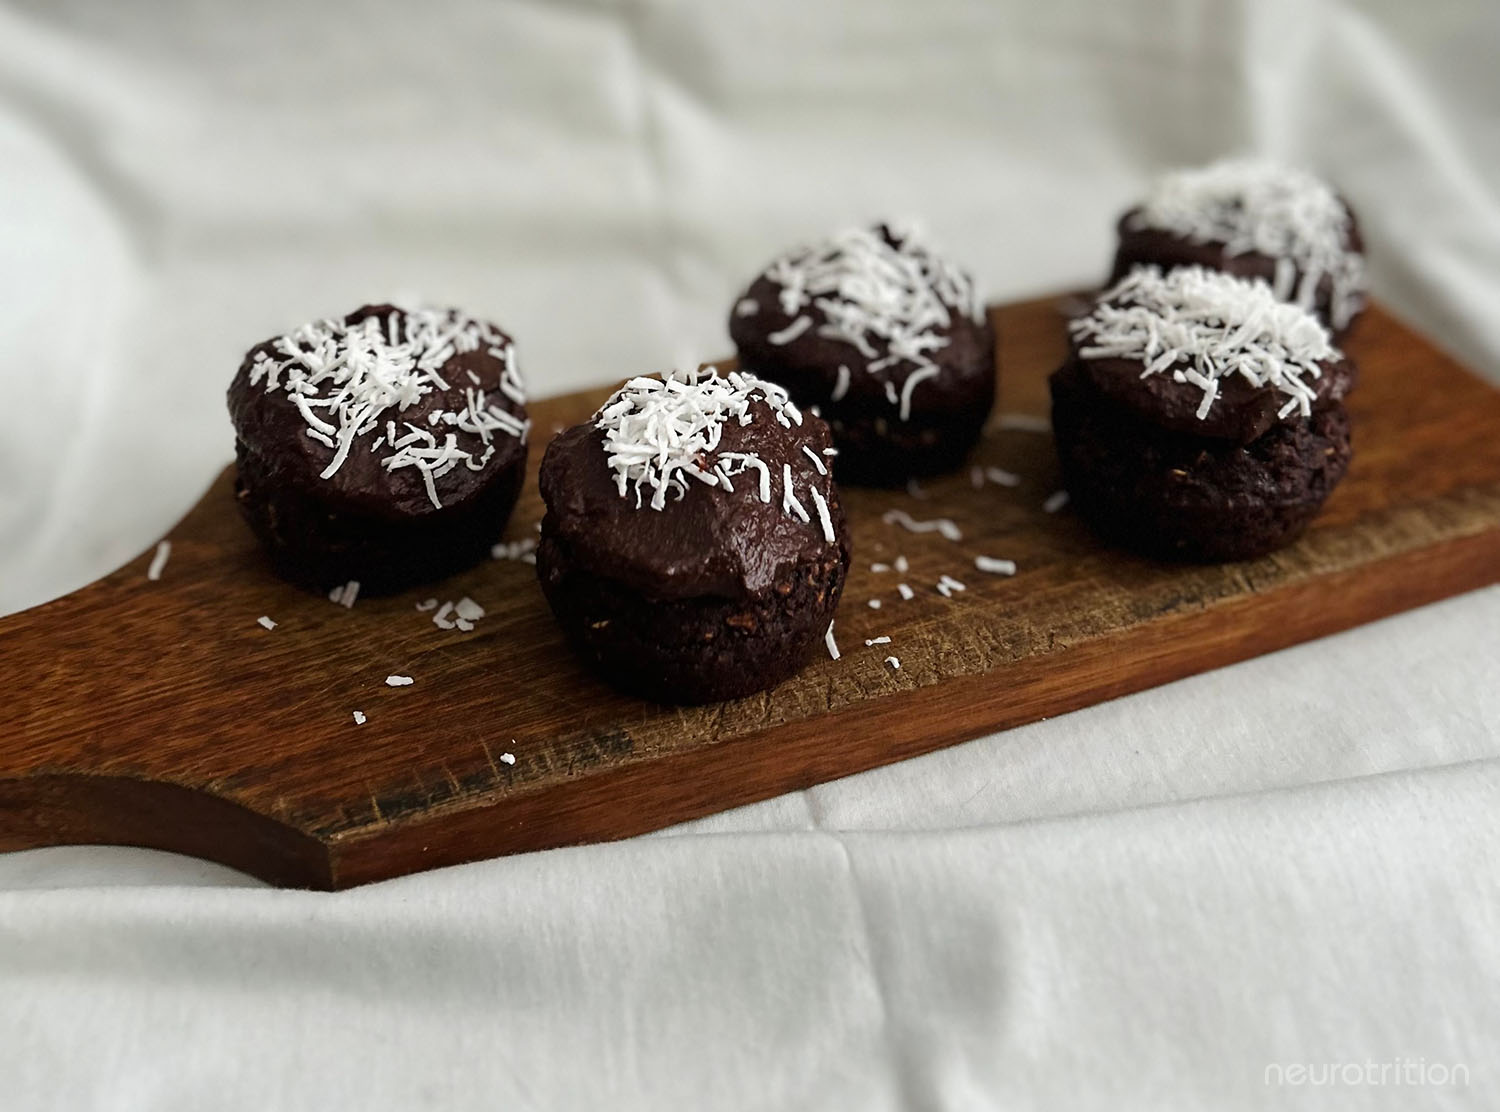 Fudgy chocolate cupcakes with sweet potato frosting topped with shredded coconut on wooden cutting board.